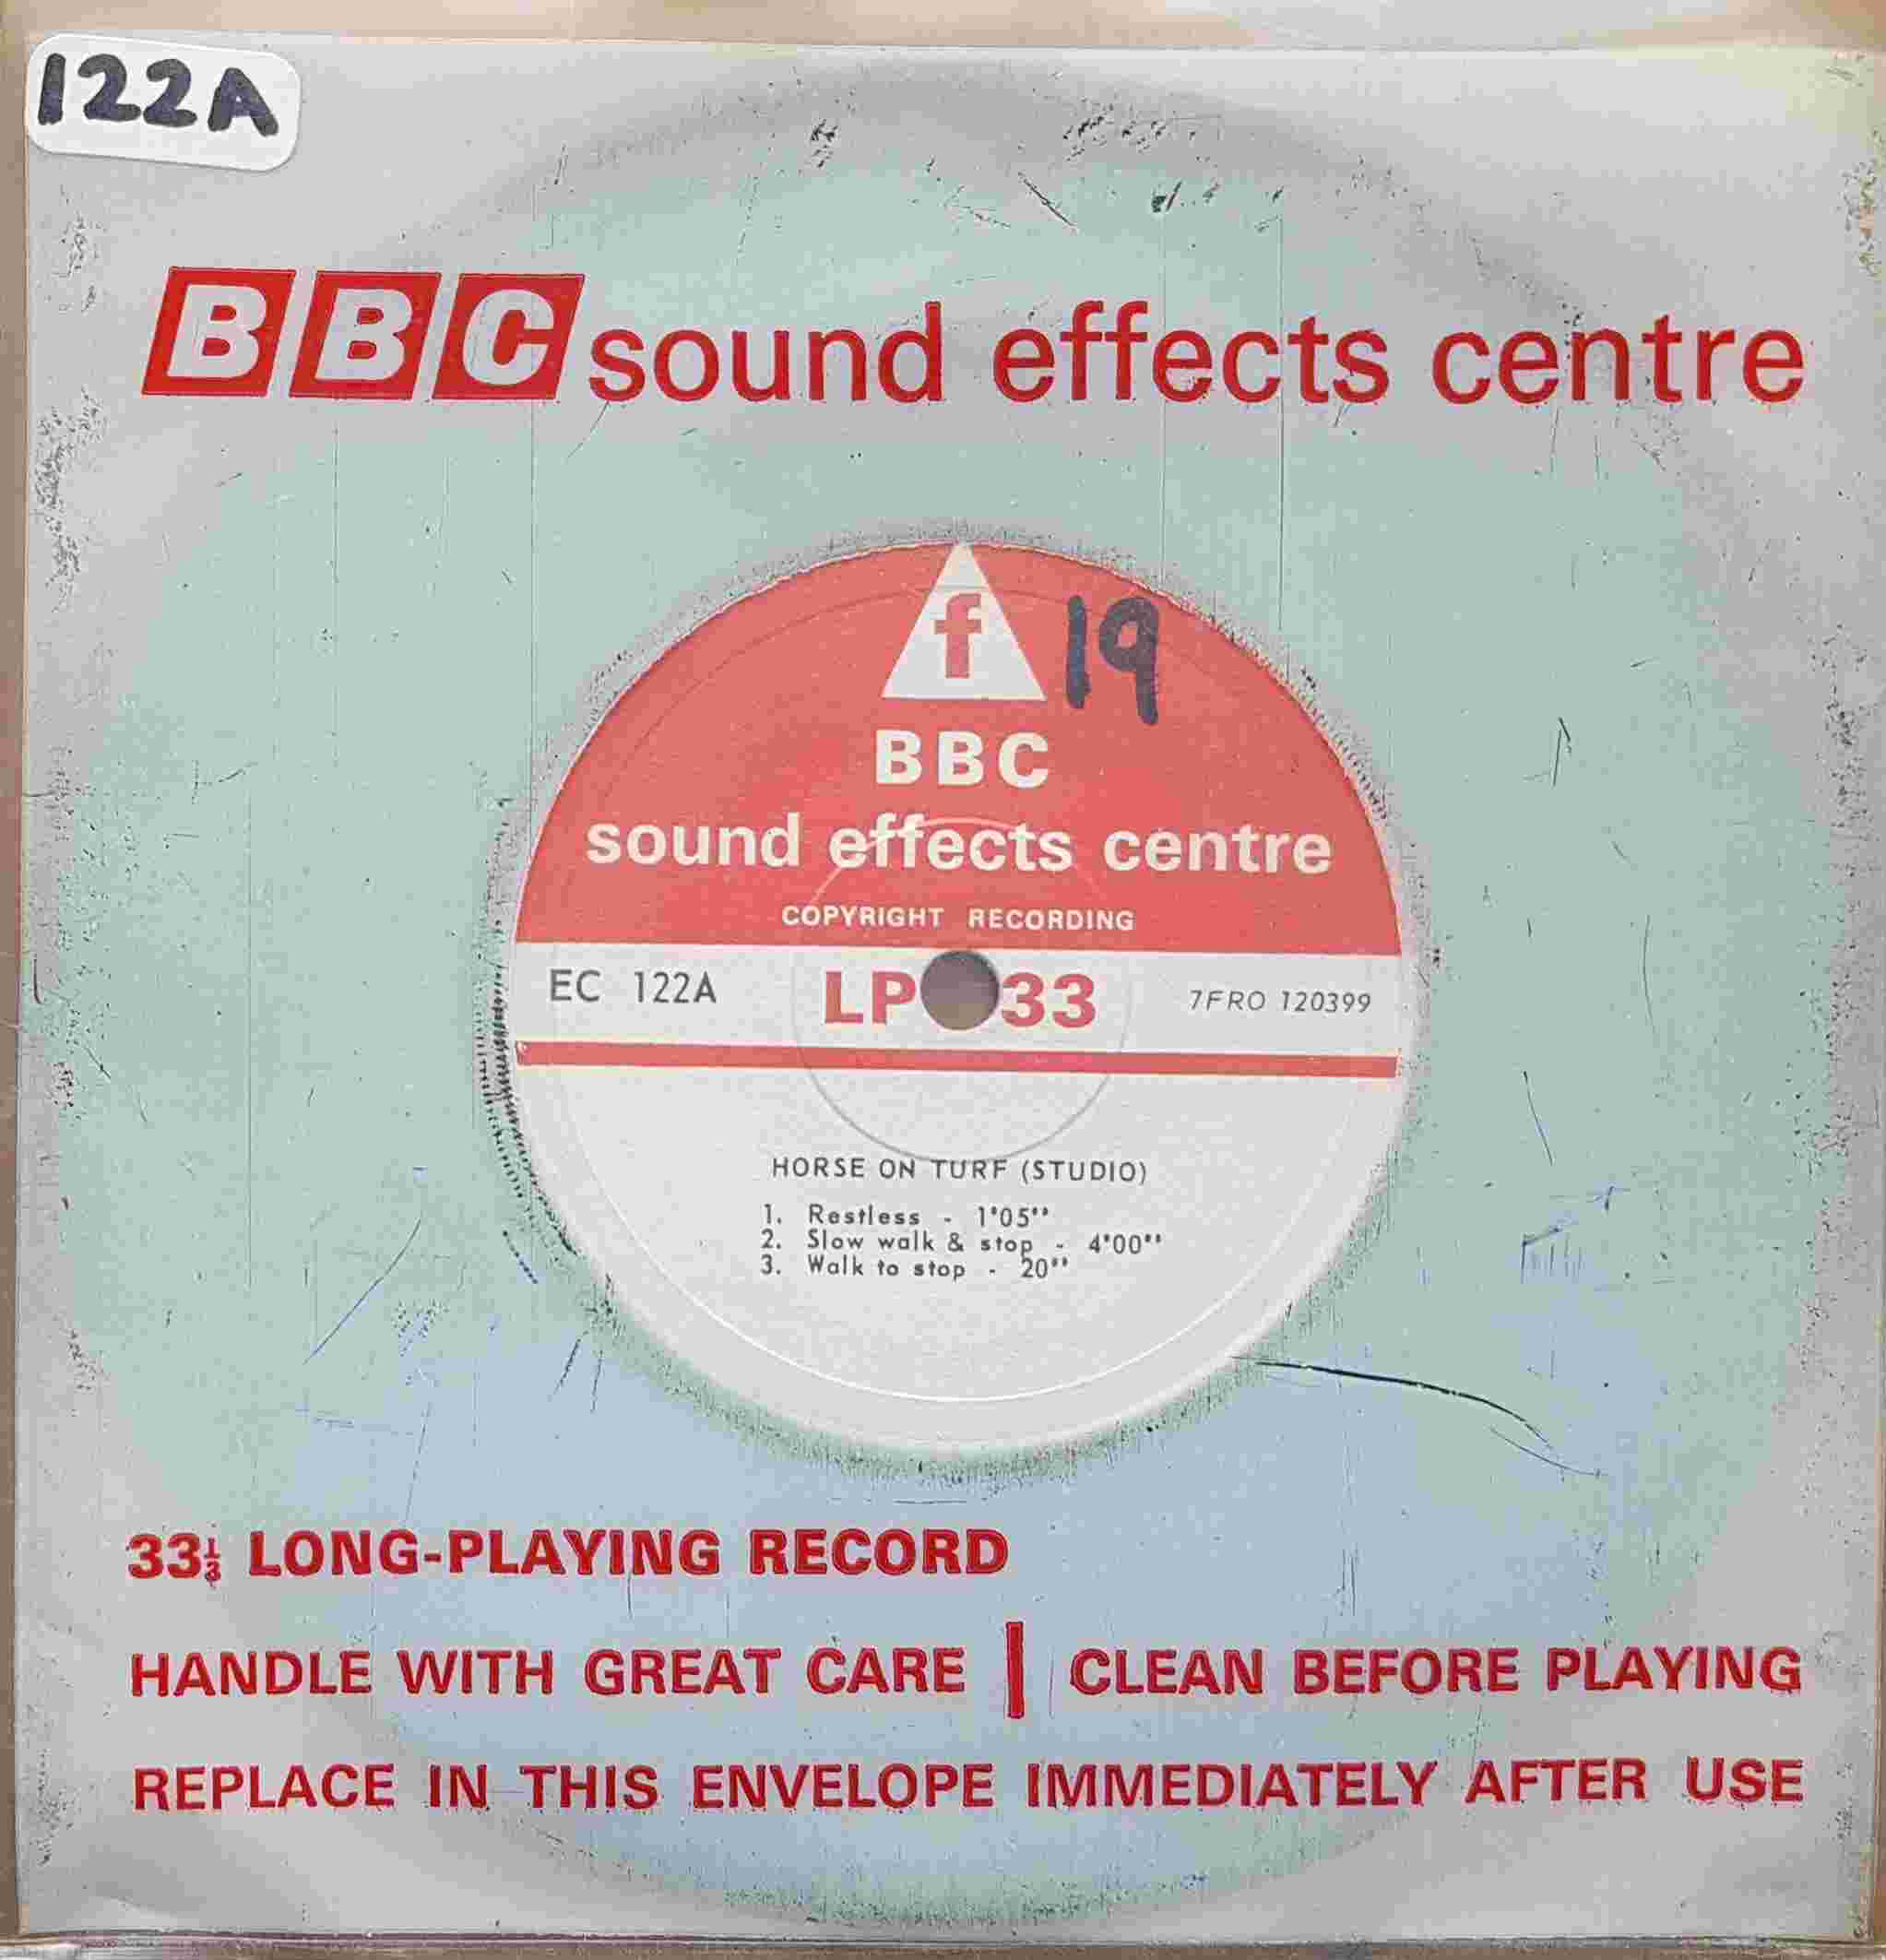 Picture of EC 122A Horse on turf (Studio) by artist Not registered from the BBC records and Tapes library